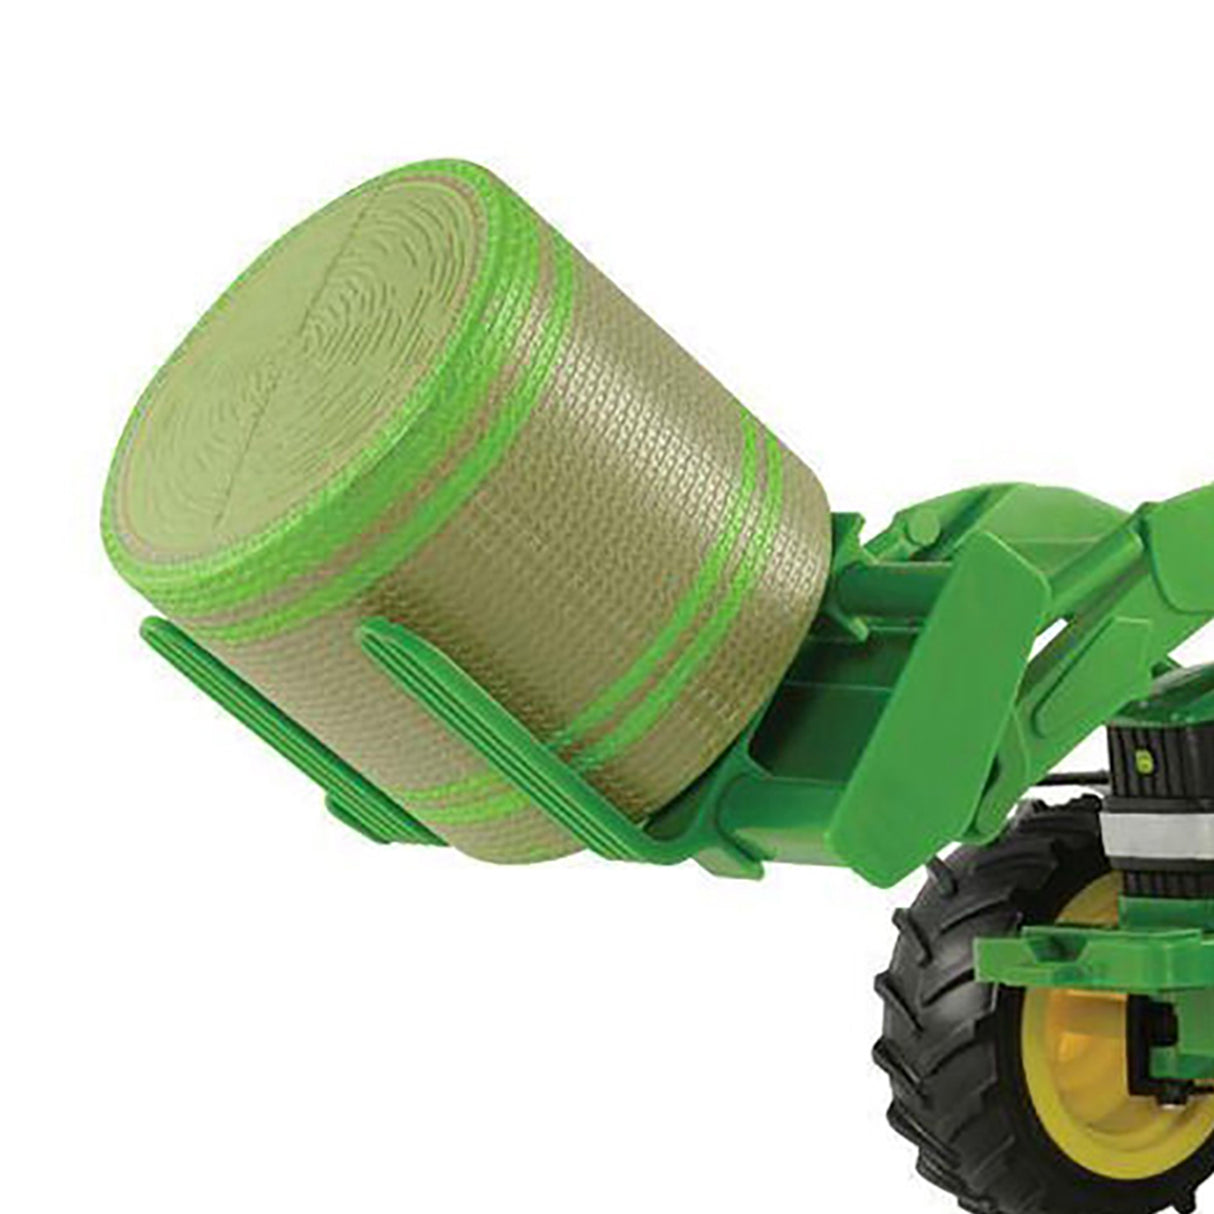 John Deere 1:16 Tractor with Bale Mover and Bale